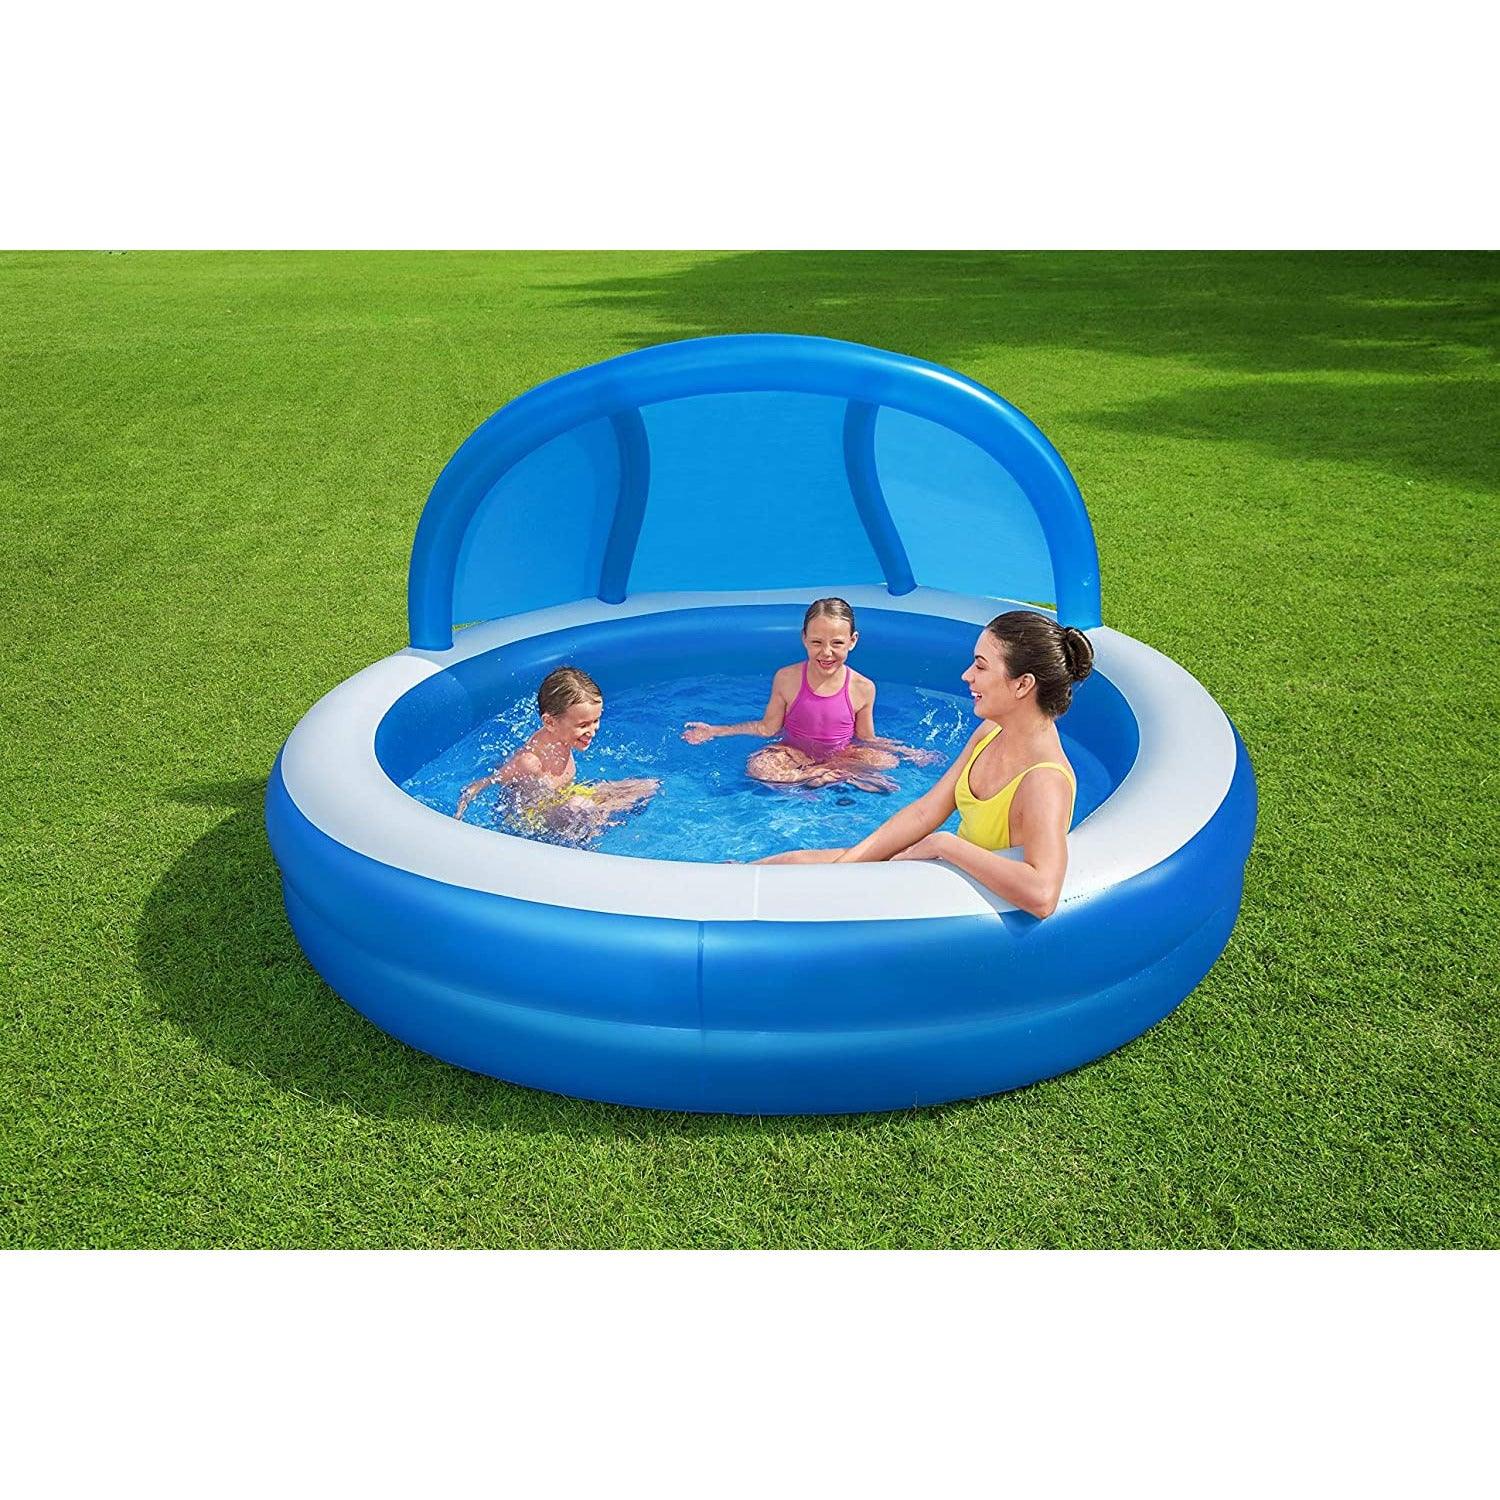 Bestway 54337 Swimming Pool With Sunshade 241 x 140 cm - BumbleToys - 5-7 Years, 8-13 Years, Bestway, Boys, Floaters, Girls, Sand Toys Pools & Inflatables